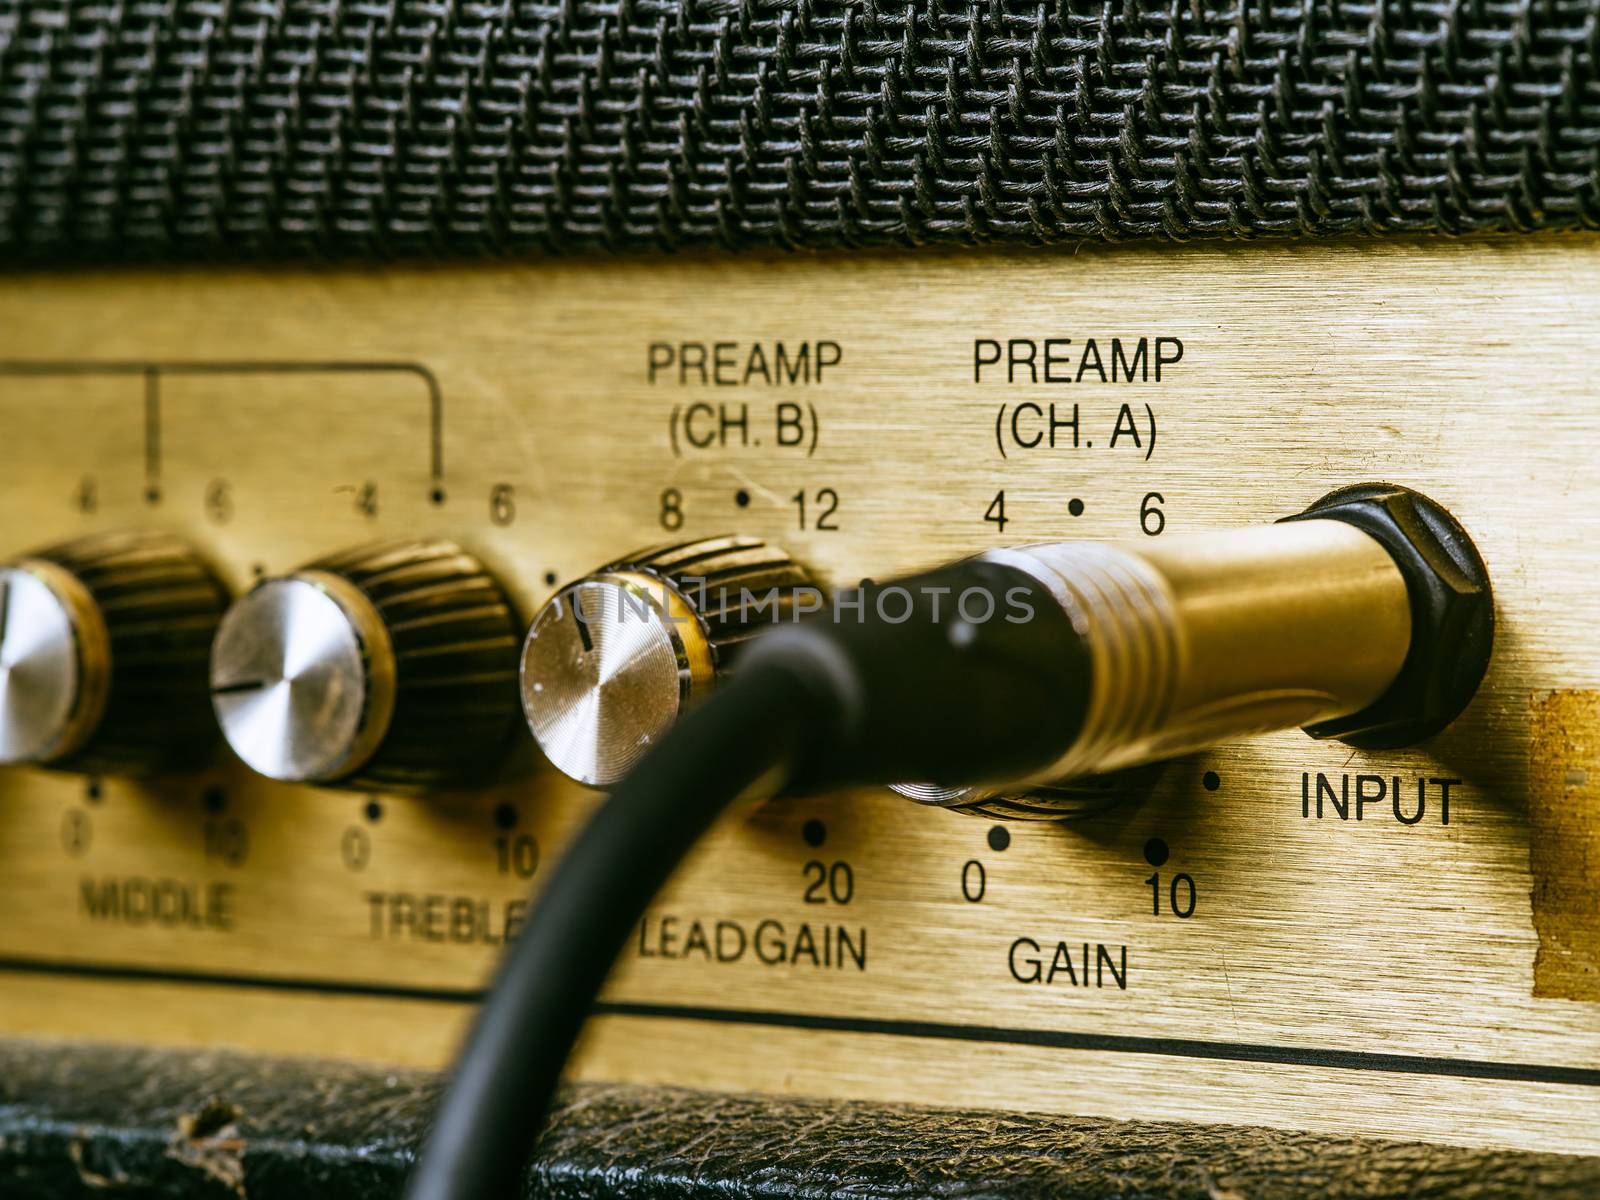 Macro photo of a vintage electric guitar amplifier showing the knobs and input plug.
